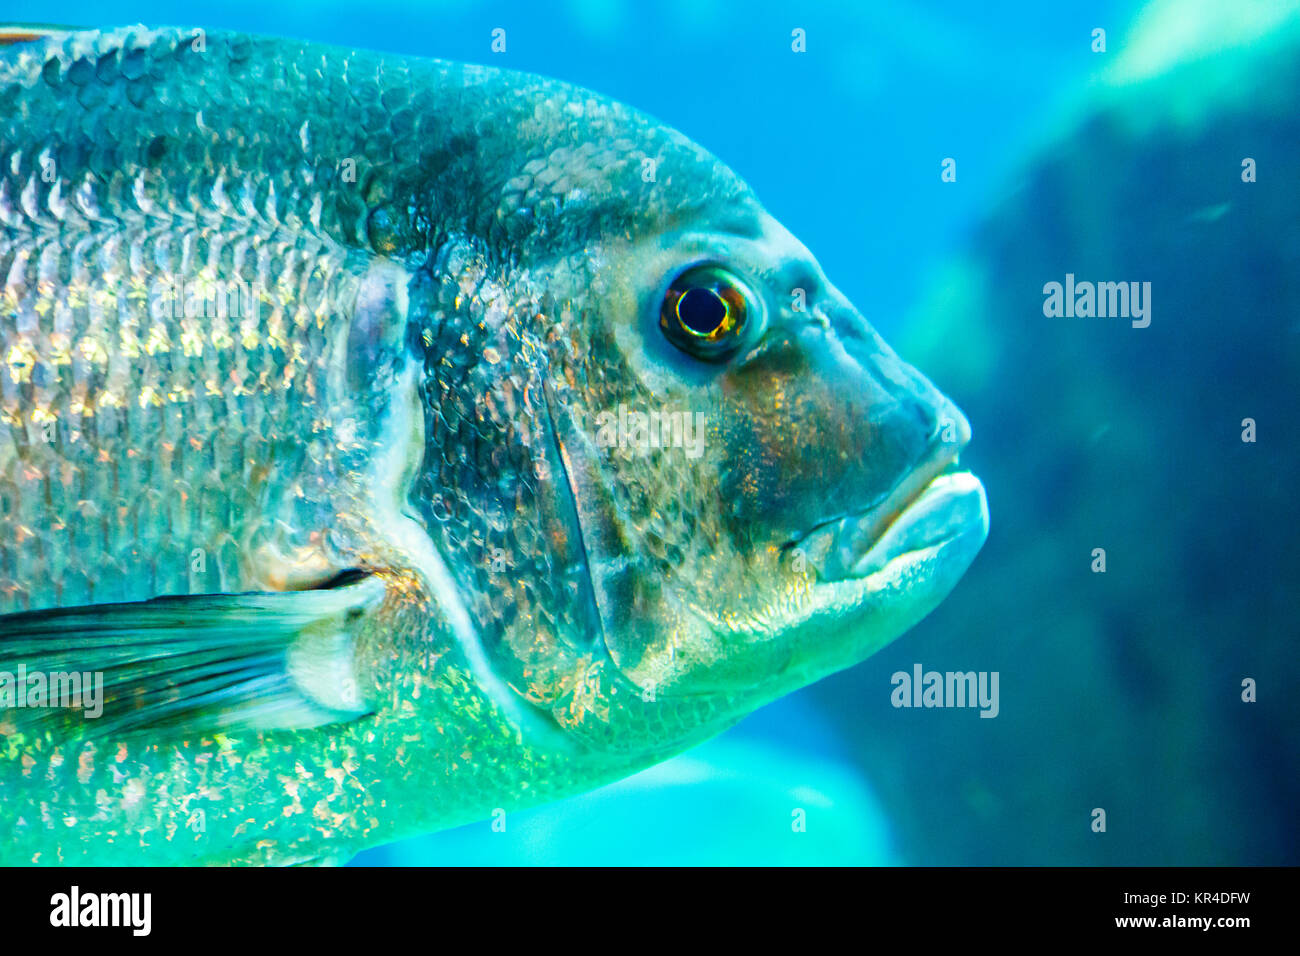 Red porgy or common seabream (Pagrus pagrus). Stock Photo